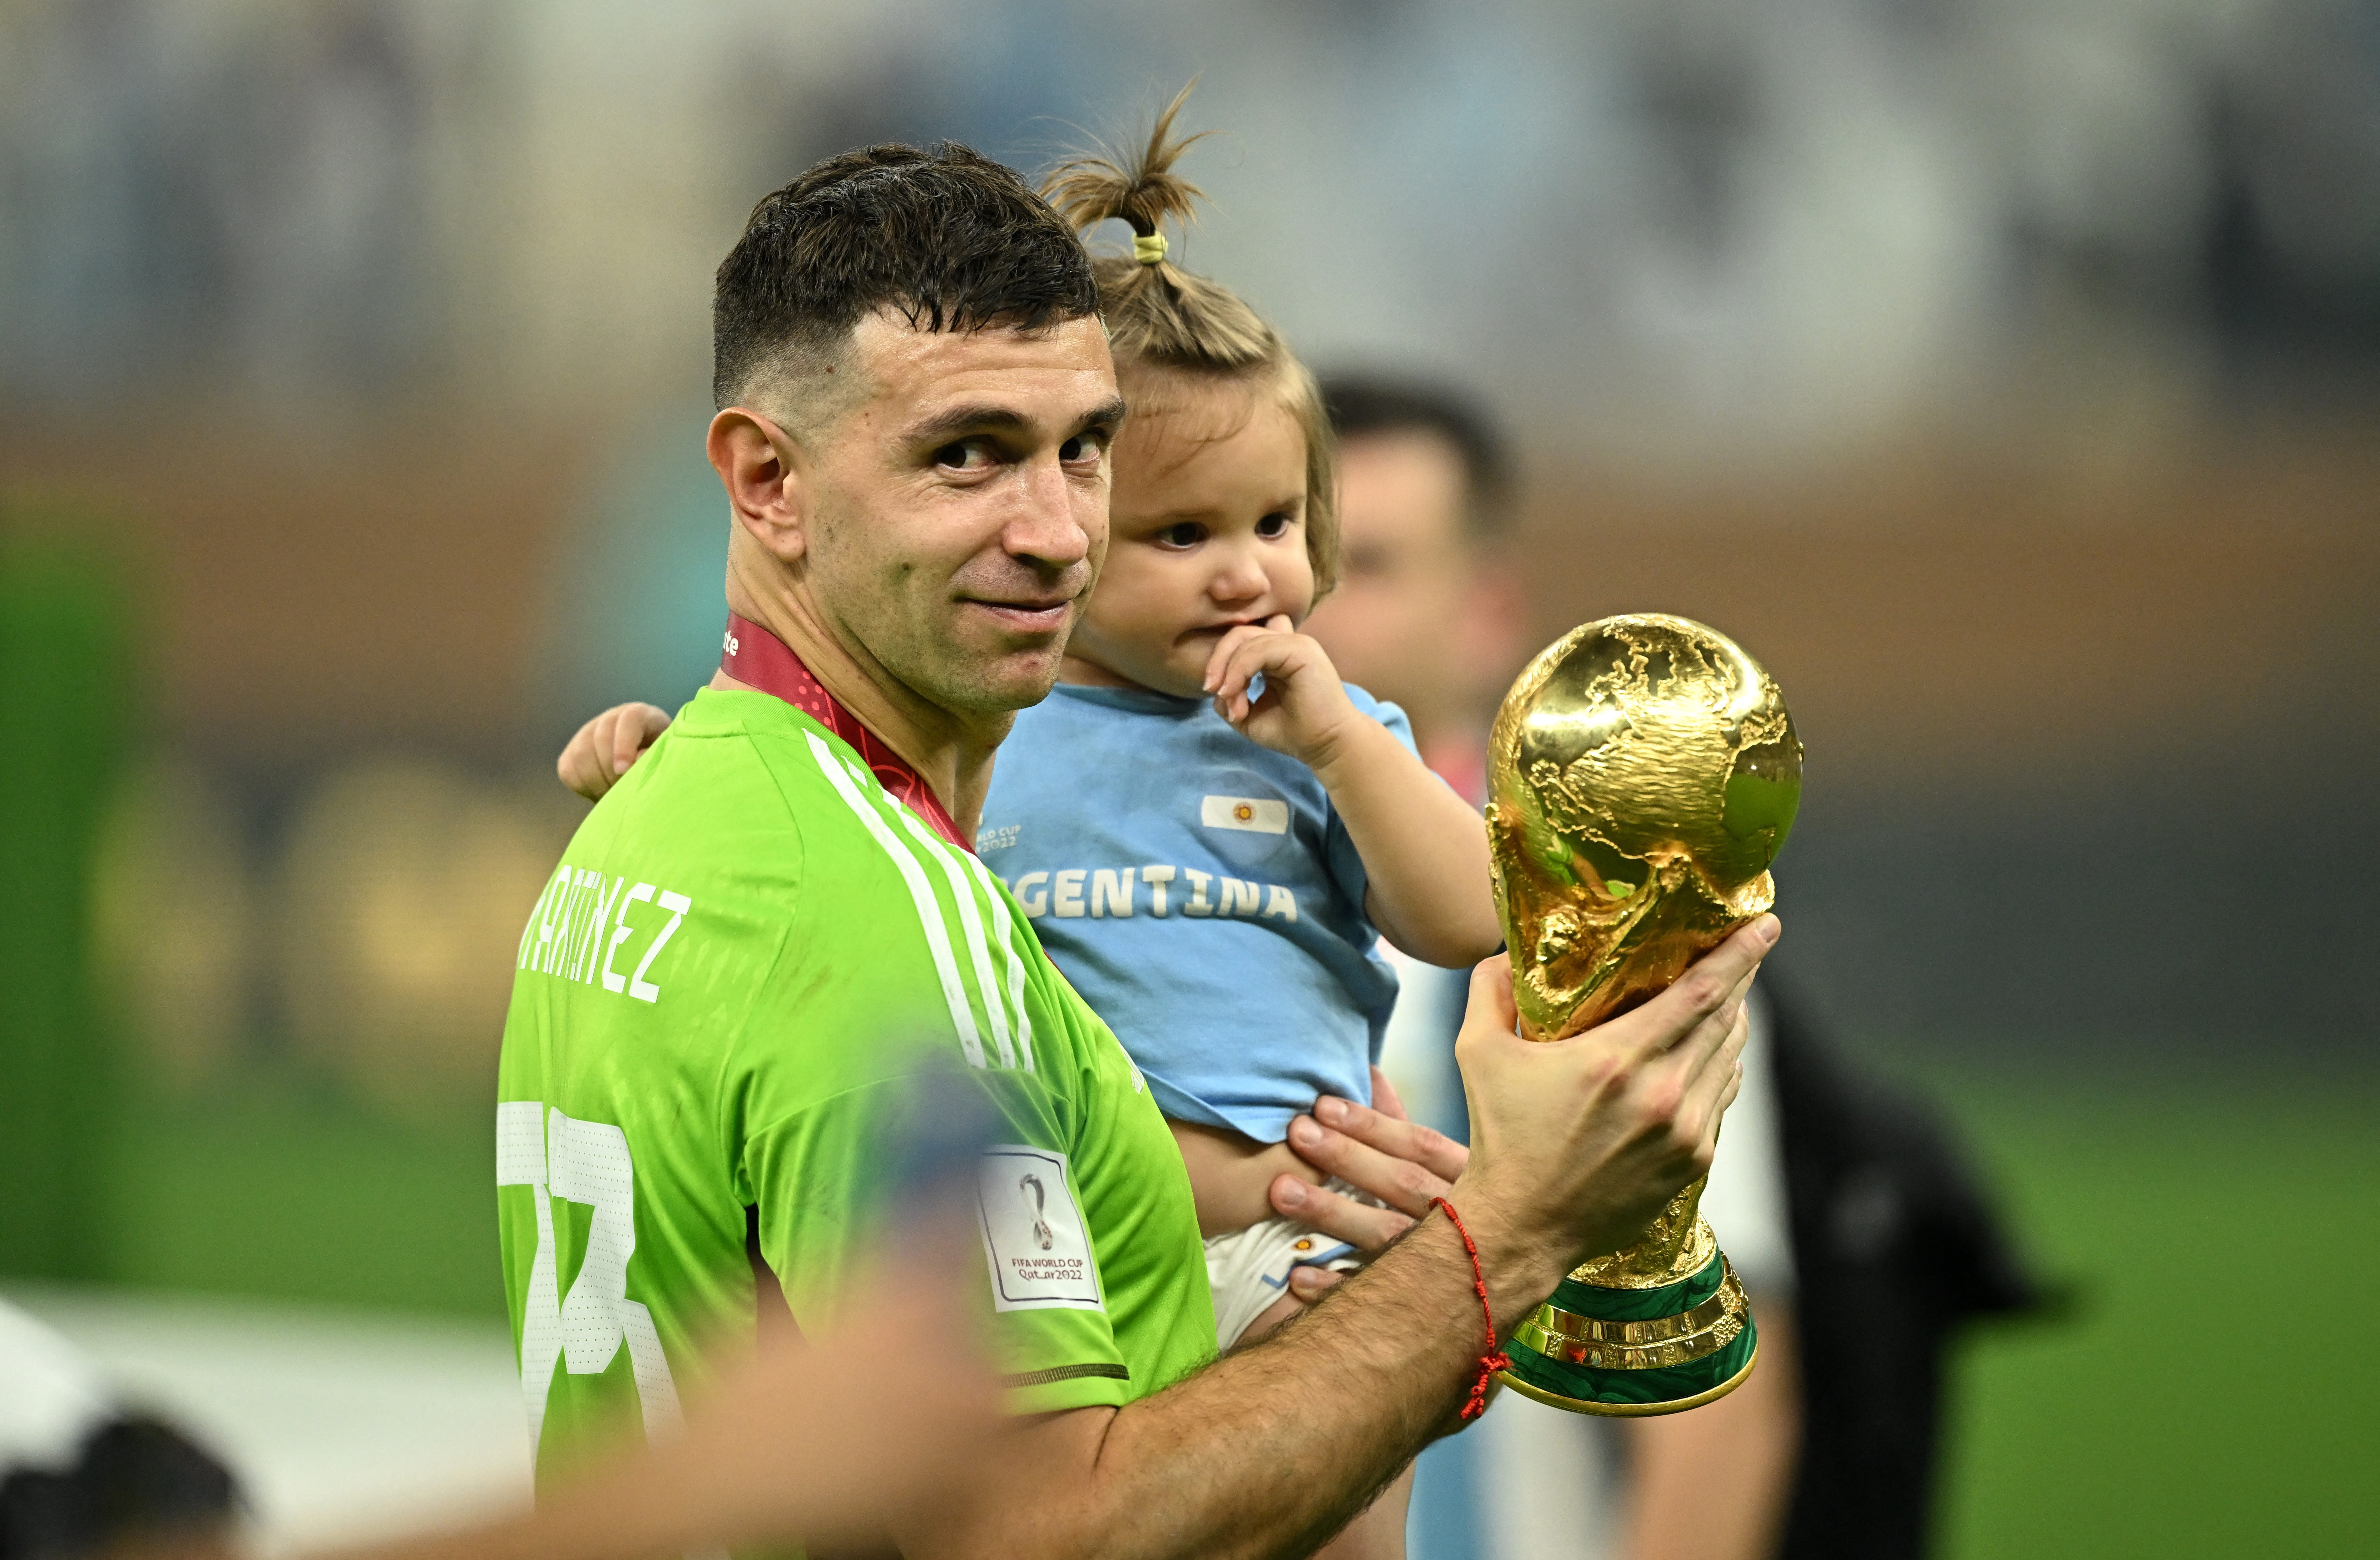 Soccer Football - FIFA World Cup Qatar 2022 - Final - Argentina v France - Lusail Stadium, Lusail, Qatar - December 18, 2022  Argentina's Emiliano Martinez celebrates with a child and the trophy after winning the World Cup REUTERS/Dylan Martinez